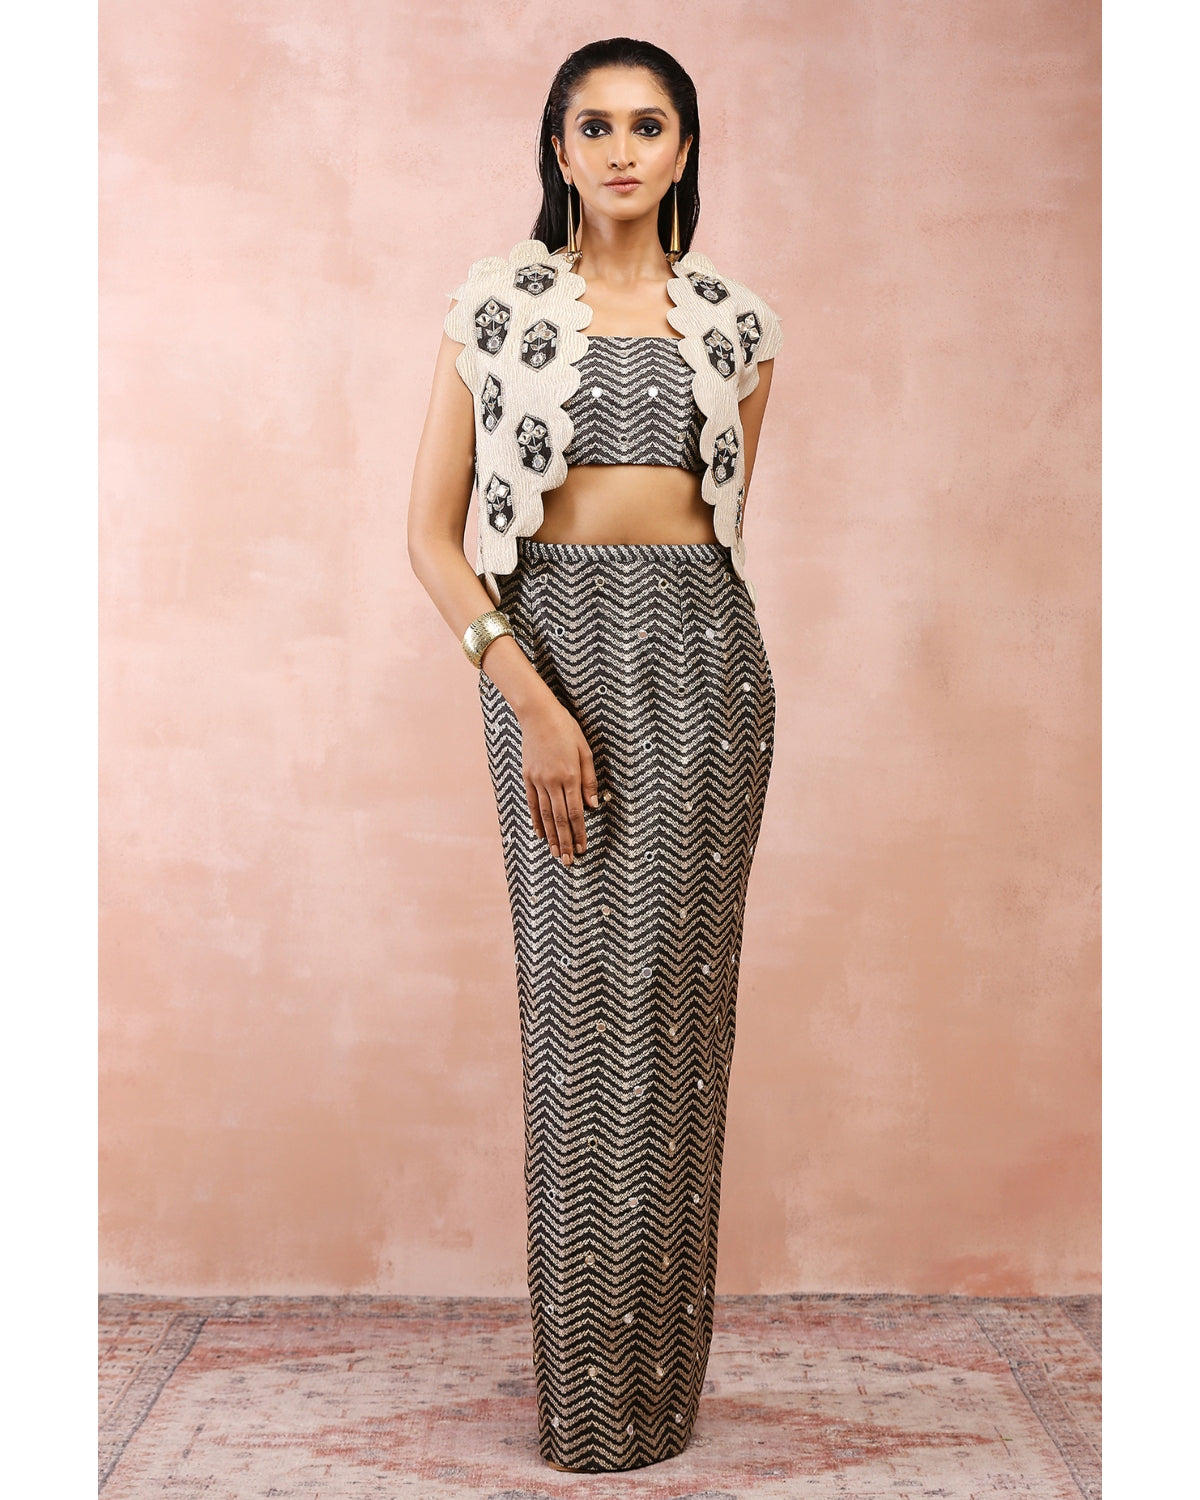 Dull Gold Jacket With Black Brocade Bustier And Skirt by Payal Singhal